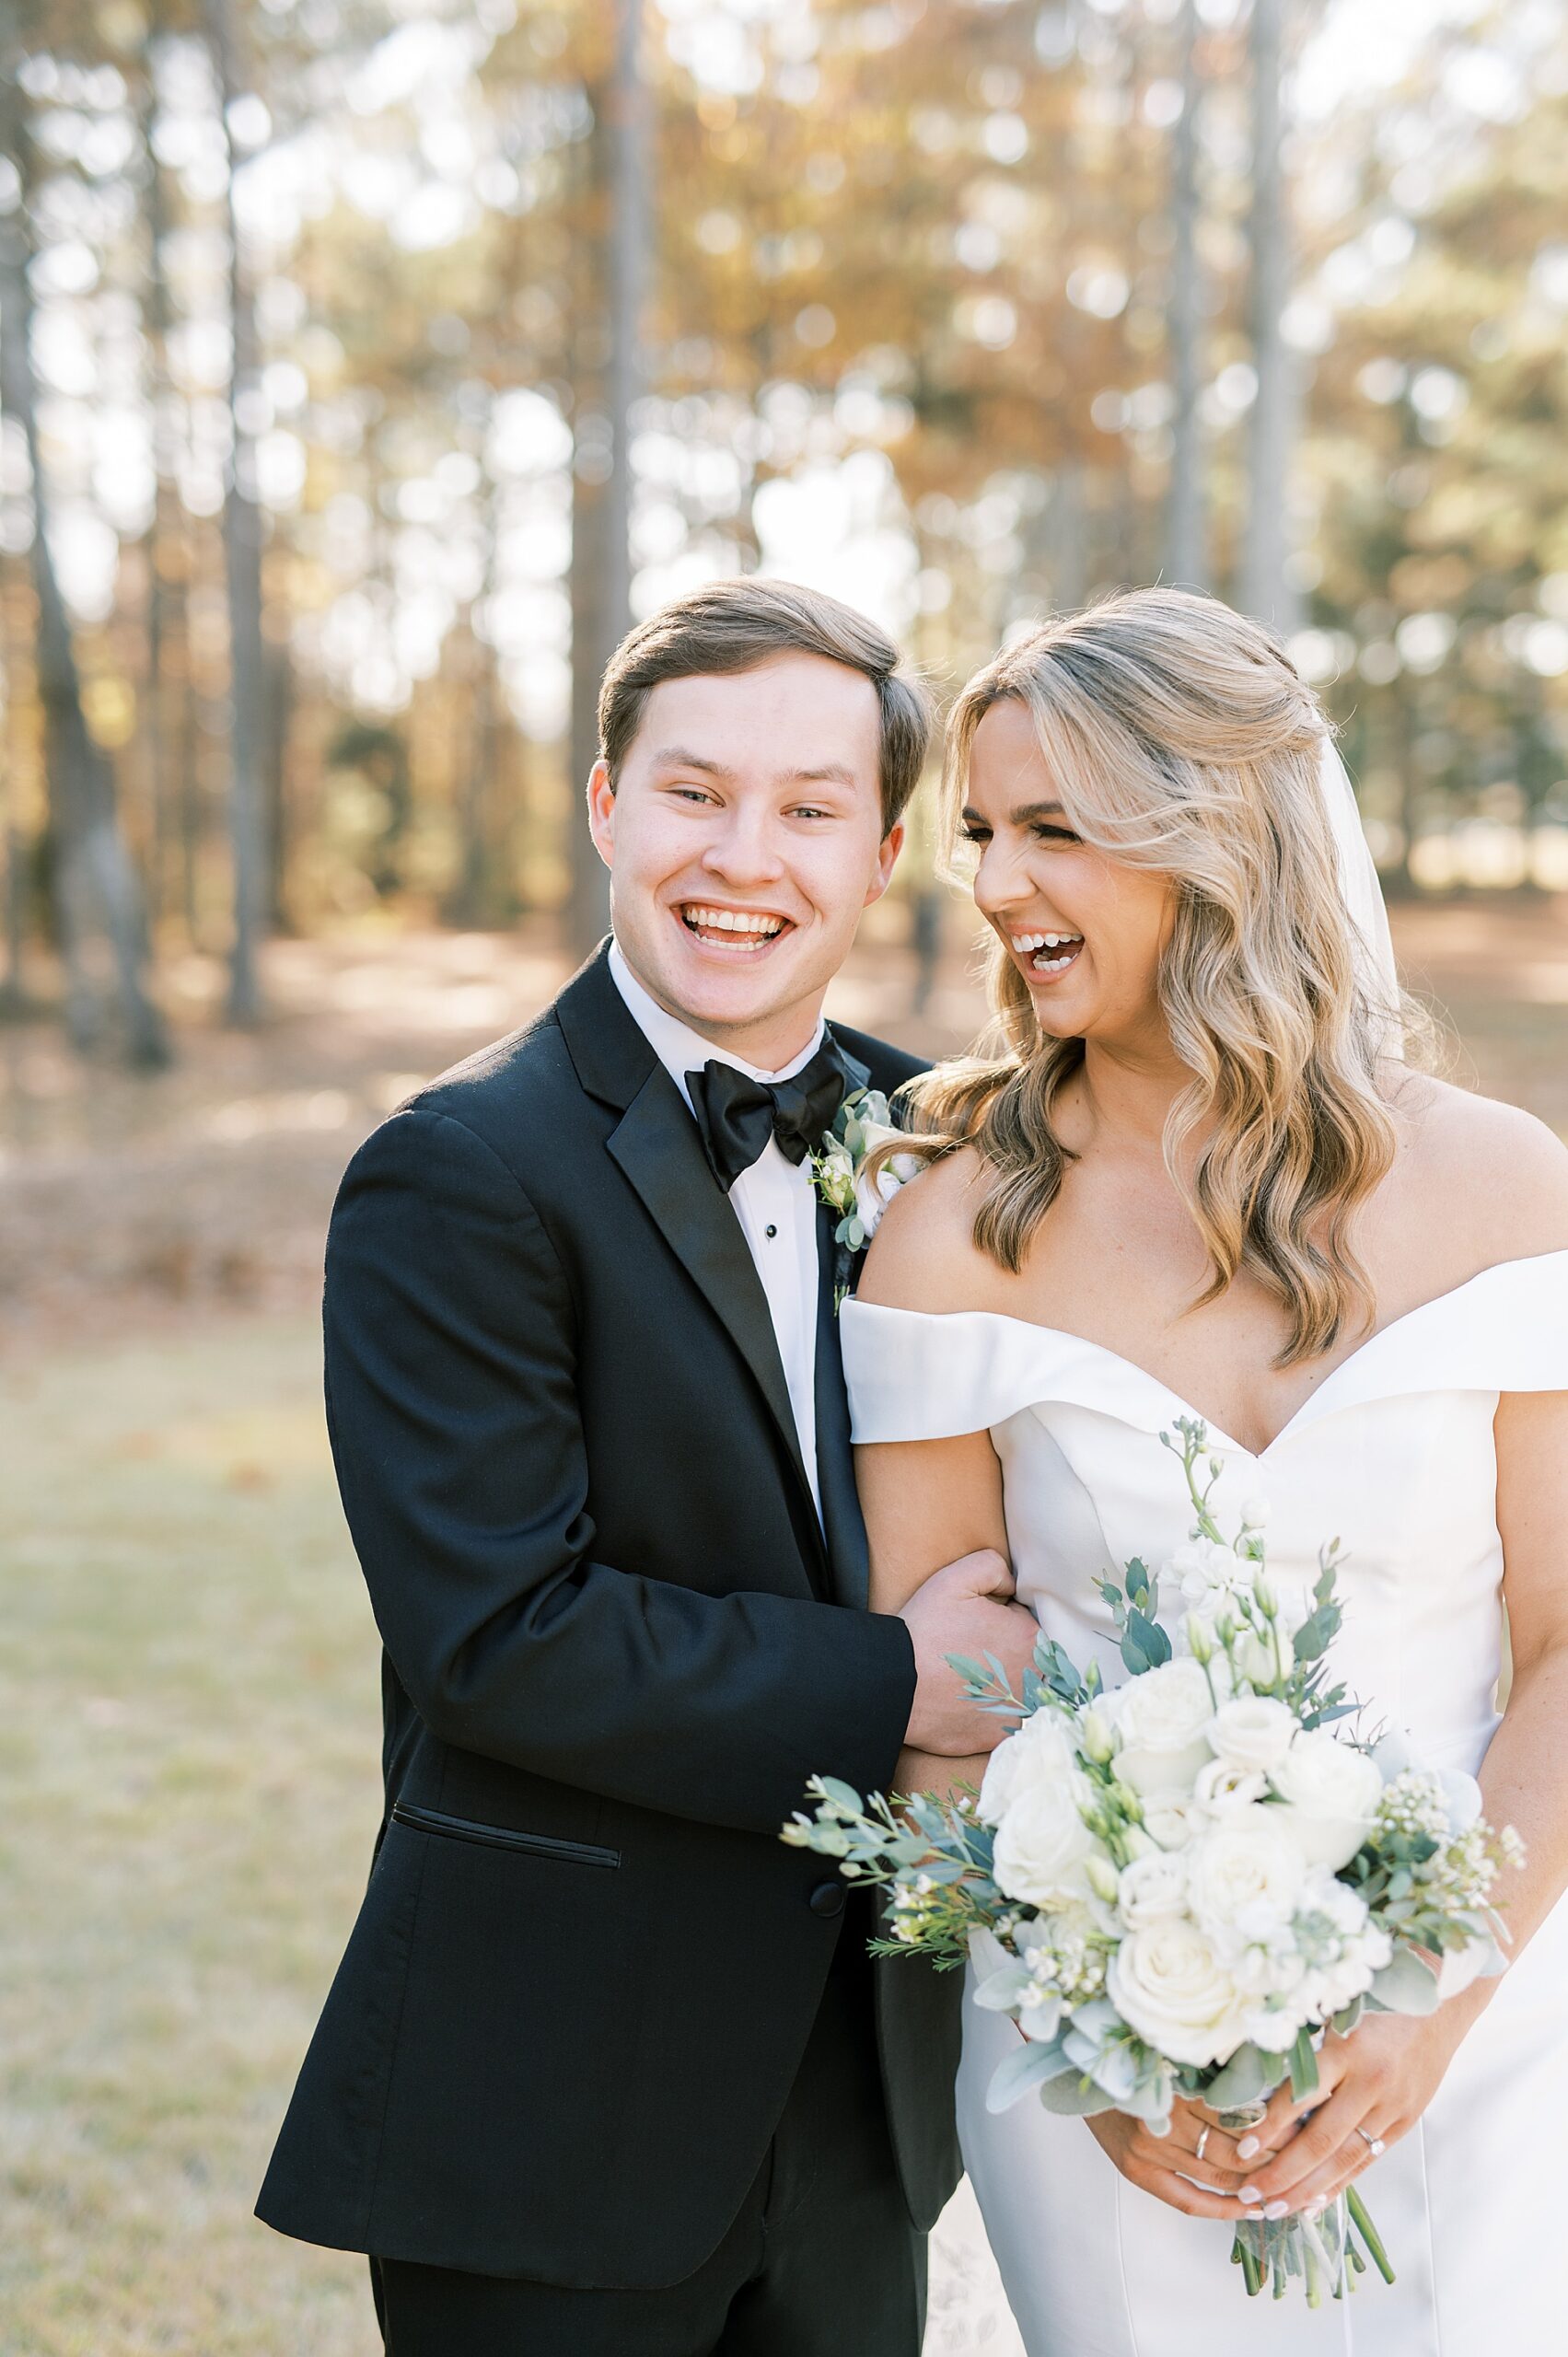 candid wedding portraits from Fall Wedding at The Witt House